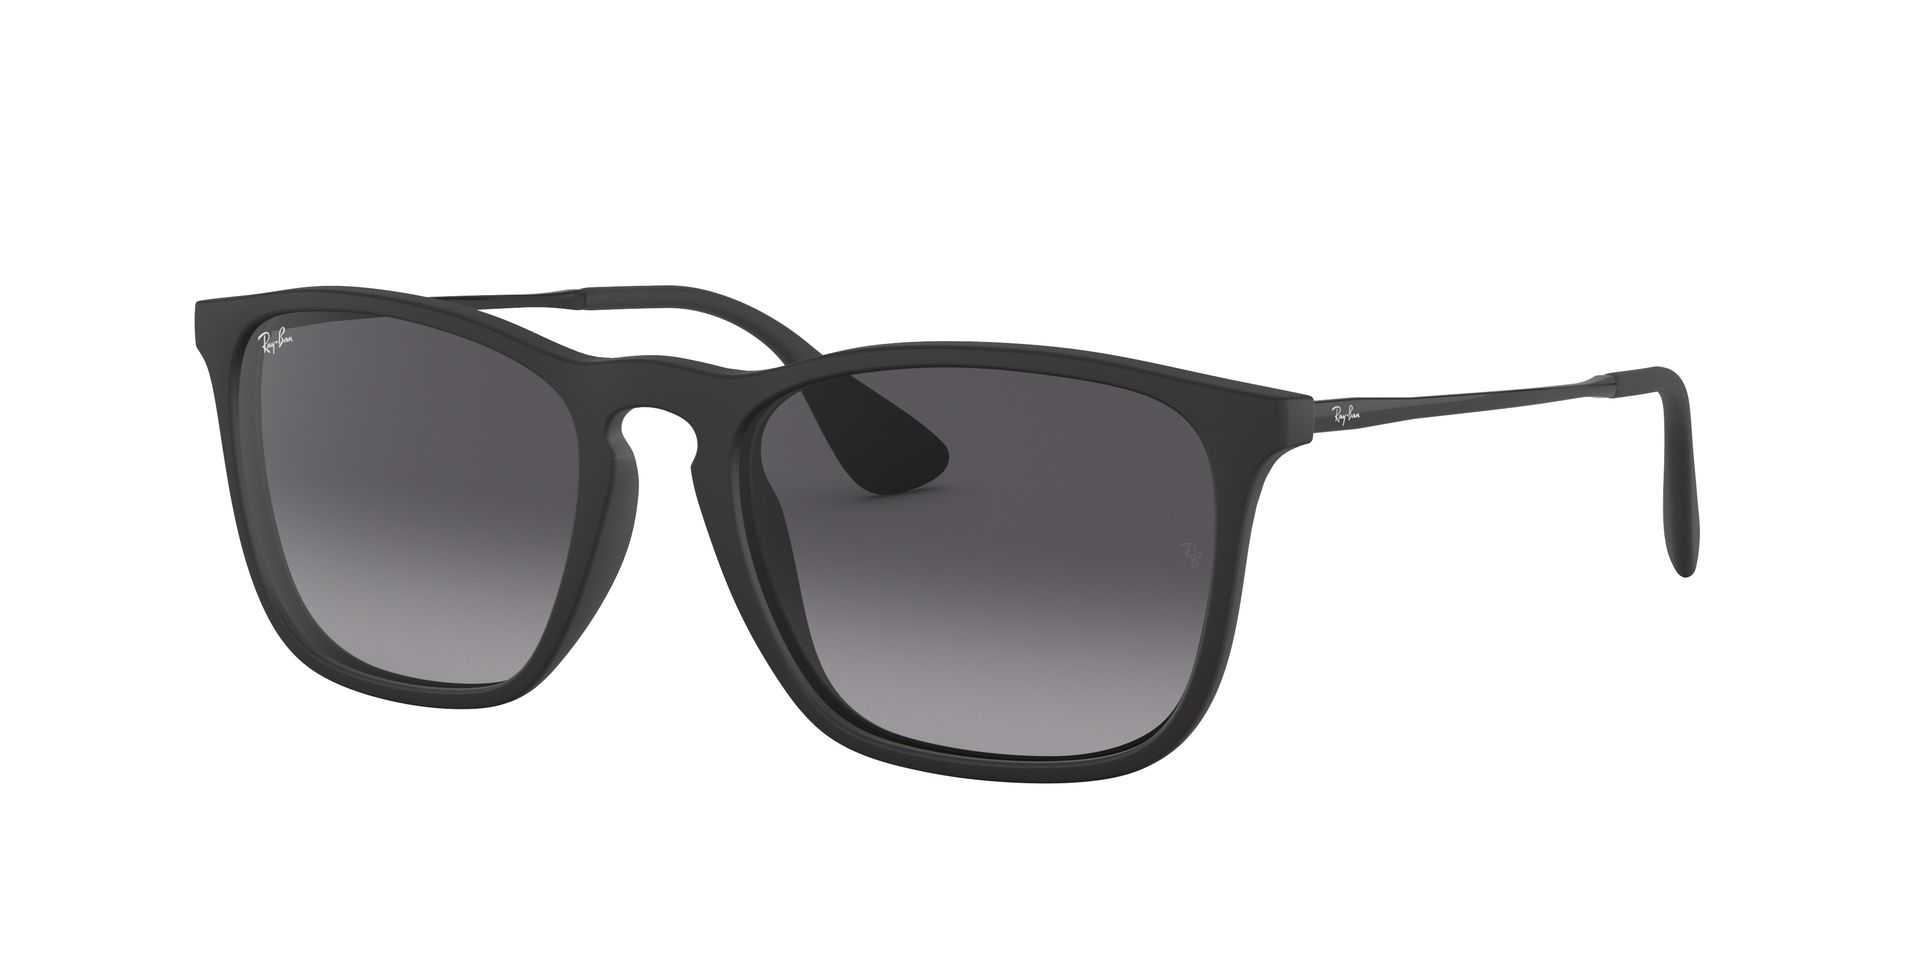 RAY-BAN RB 4187 622/8G CHRIS noire 54 